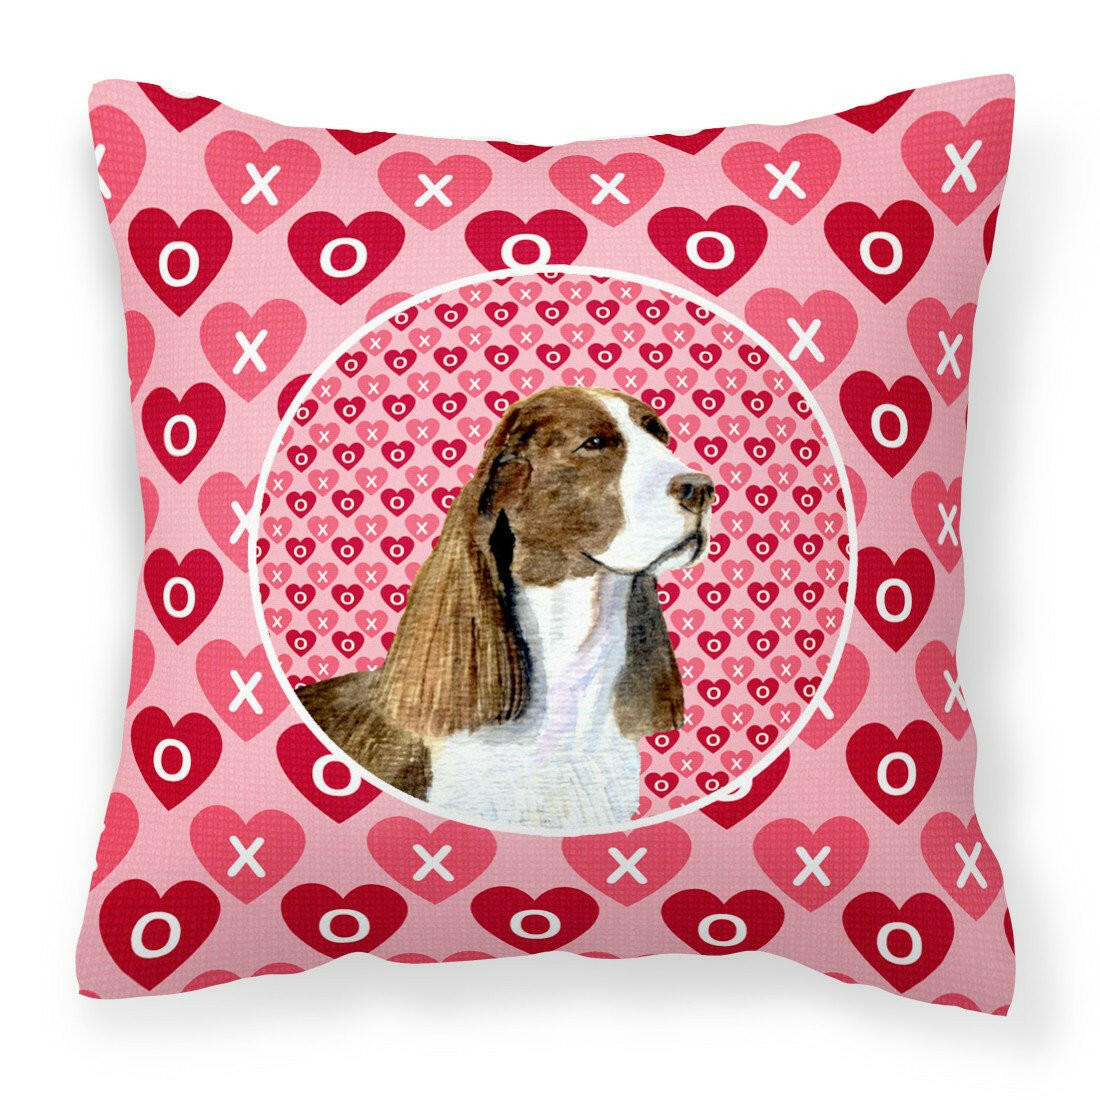 Springer Spaniel Hearts Love Valentine's Day Fabric Decorative Pillow SS4513PW1414 by Caroline's Treasures